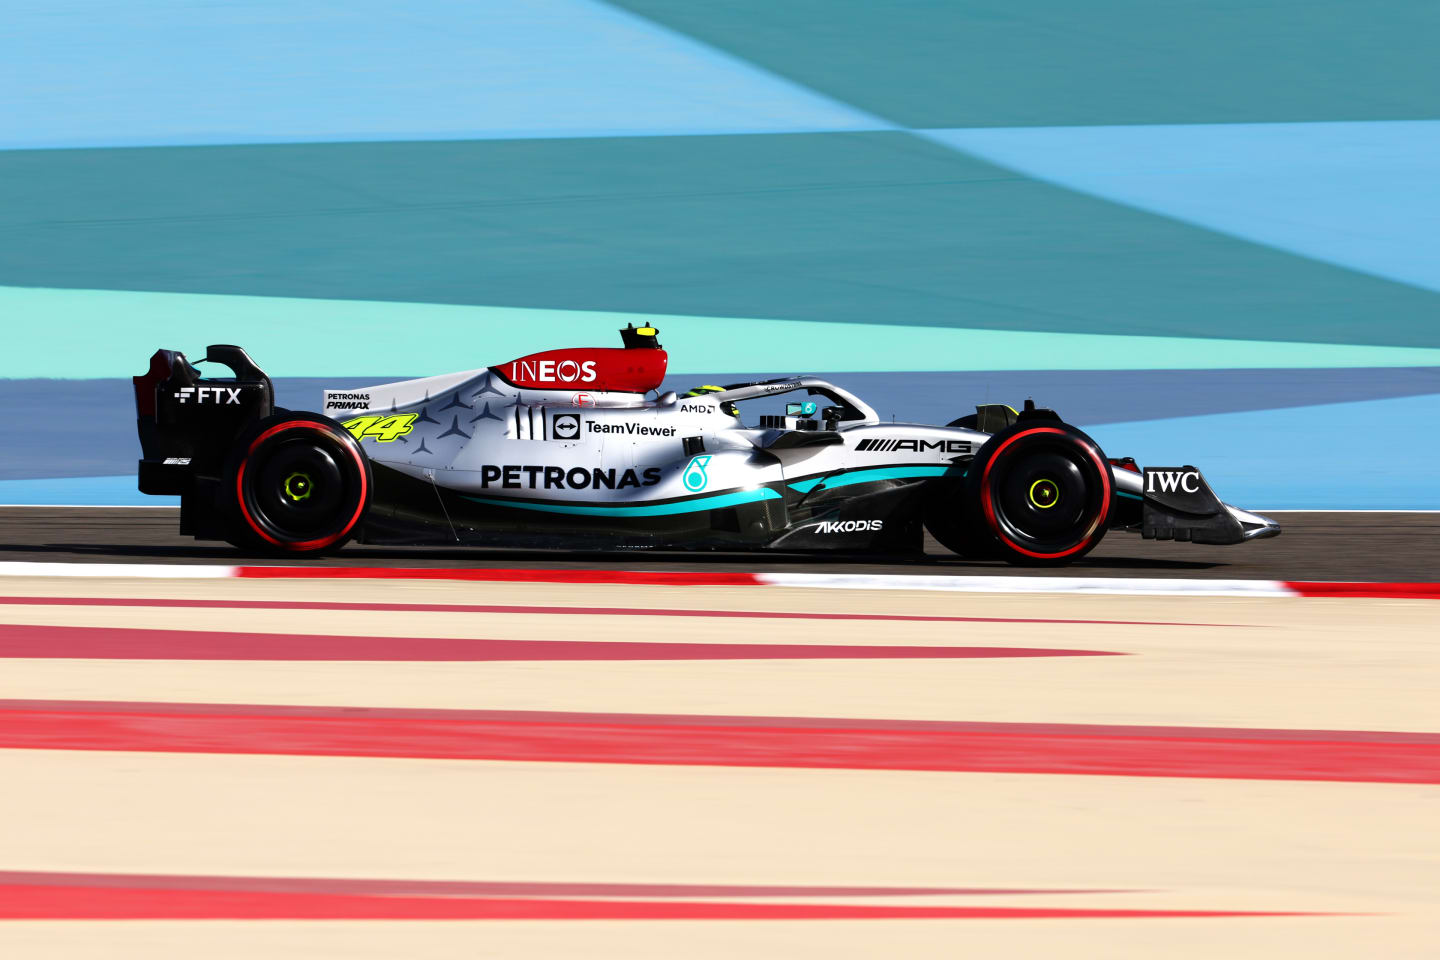 BAHRAIN, BAHRAIN - MARCH 19: Lewis Hamilton of Great Britain driving the (44) Mercedes AMG Petronas F1 Team W13 on track during final practice ahead of the F1 Grand Prix of Bahrain at Bahrain International Circuit on March 19, 2022 in Bahrain, Bahrain. (Photo by Mark Thompson/Getty Images)